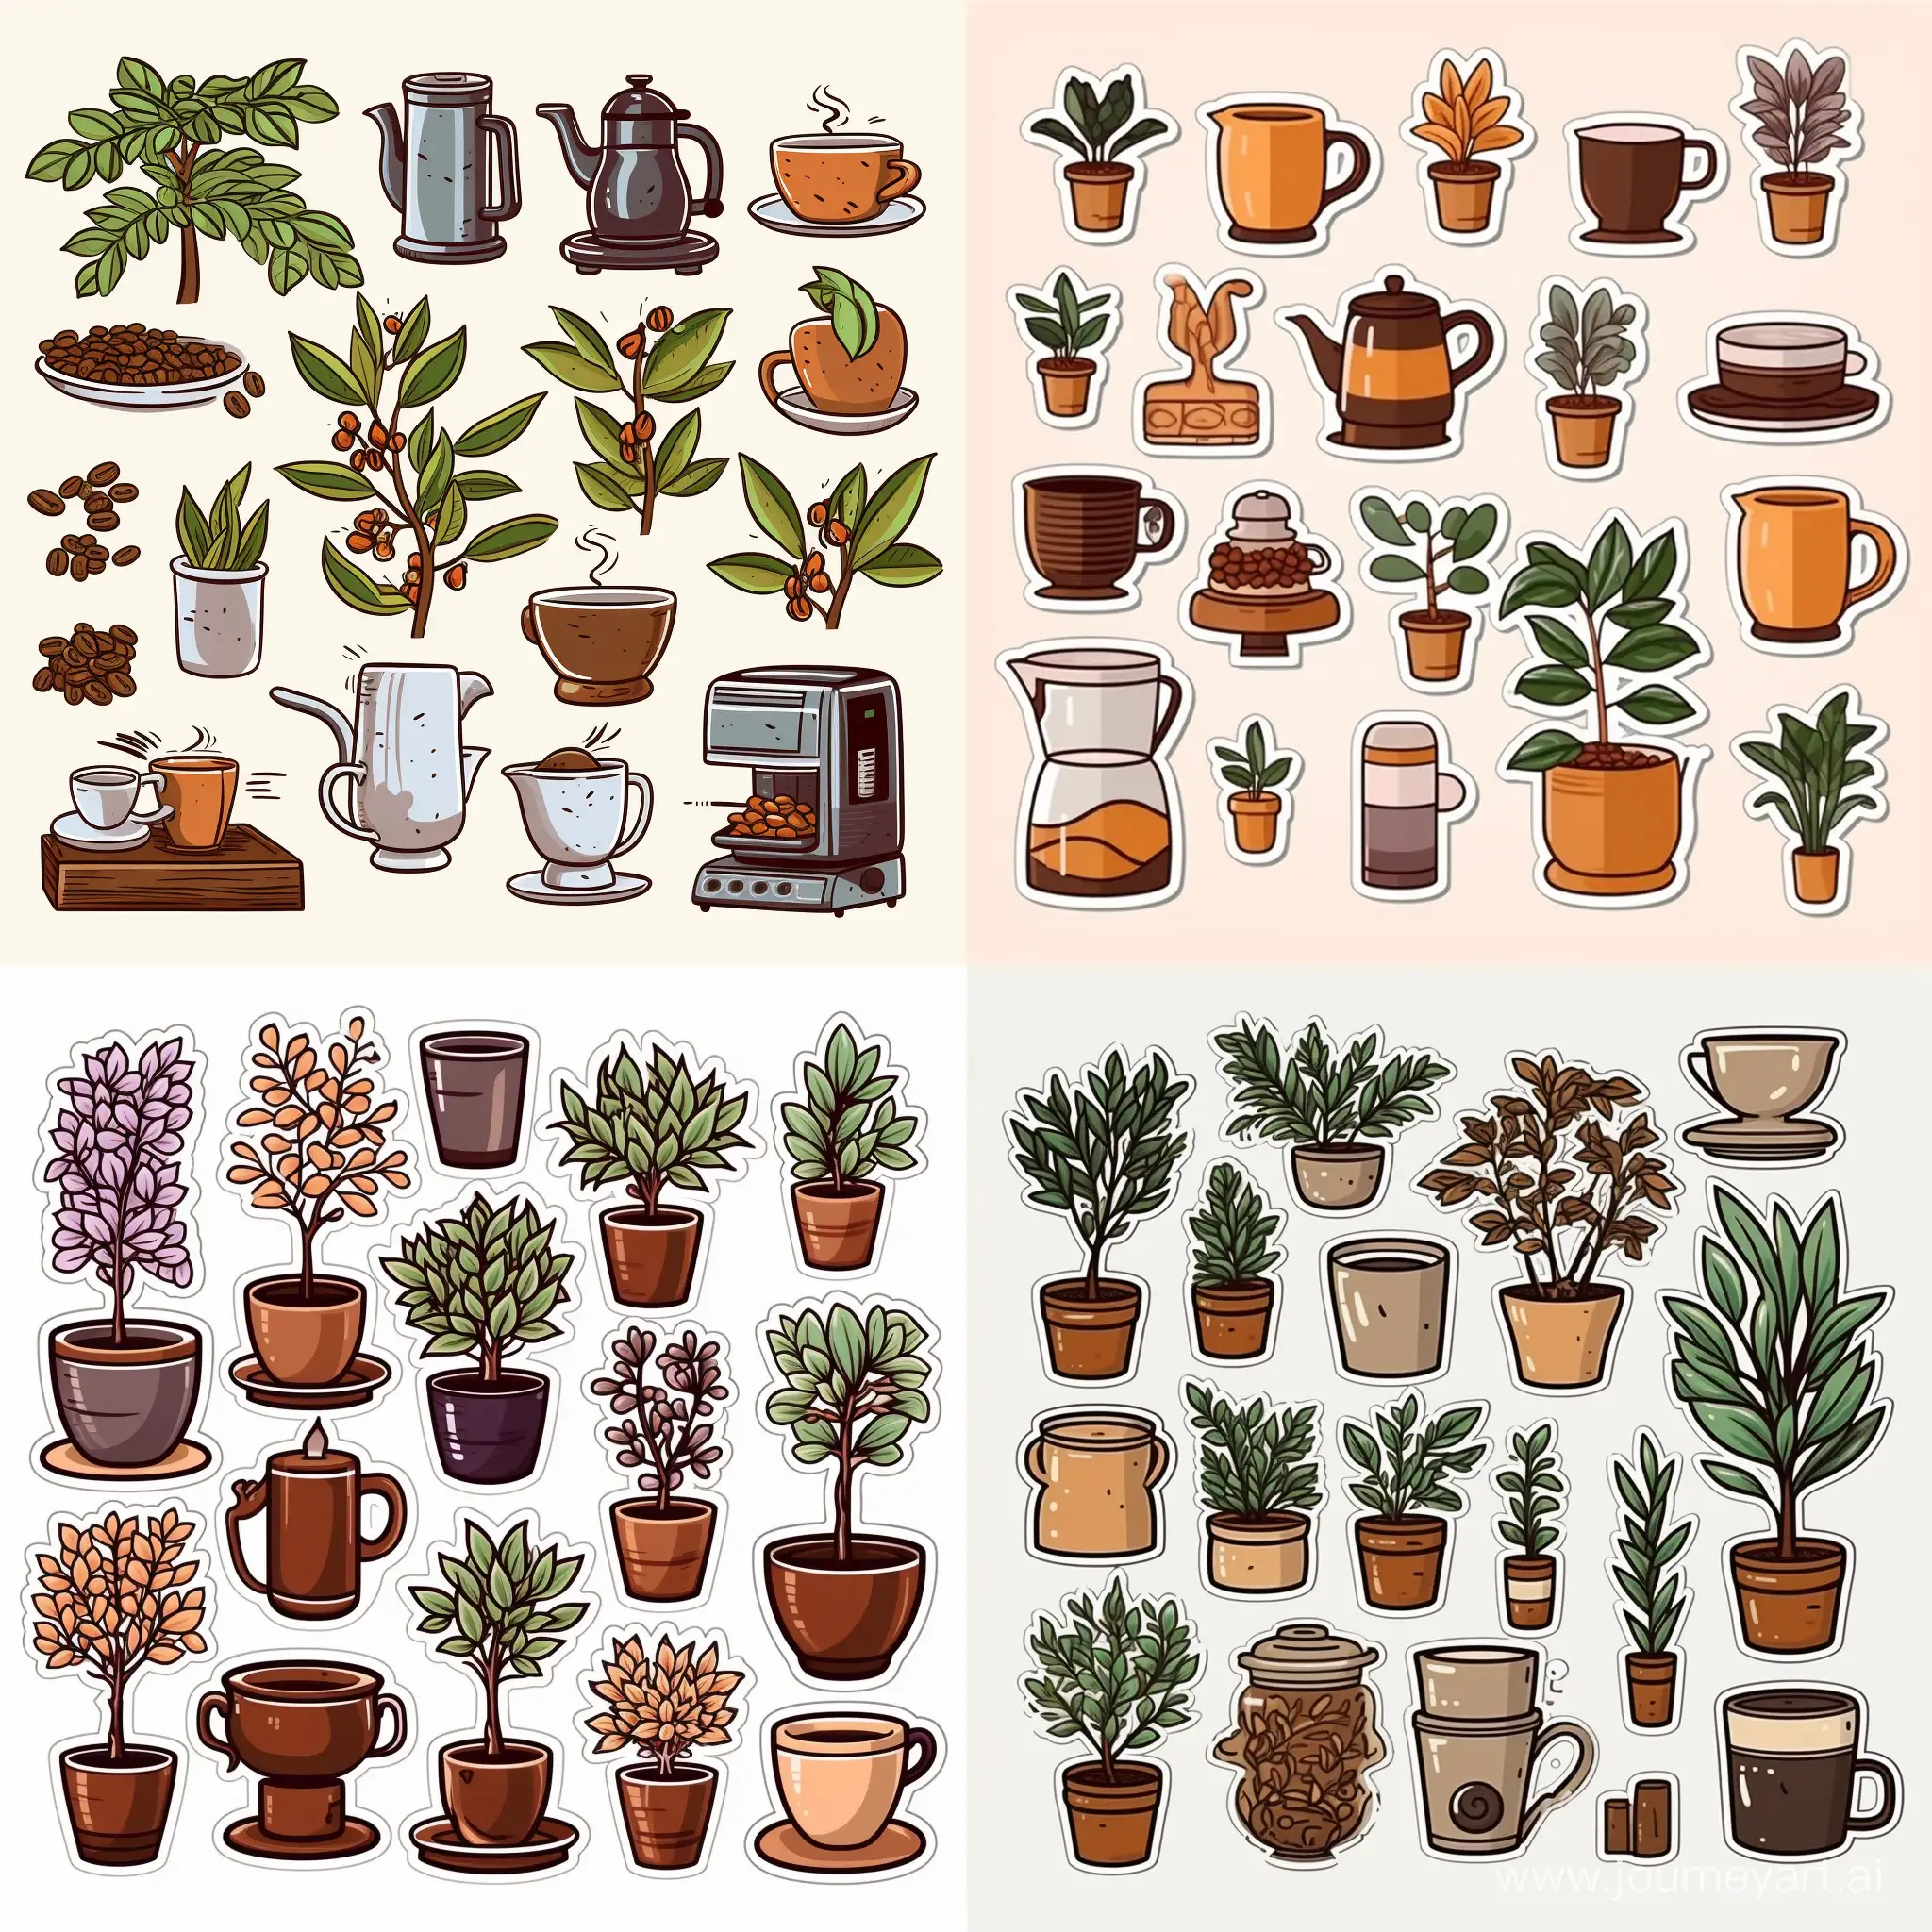 create a set of stickers for cafe, coffee, coffee beans, coffee machine, trees, plants. 

transparent background, stroke line, hand-drawn, each sticker size 1X1 